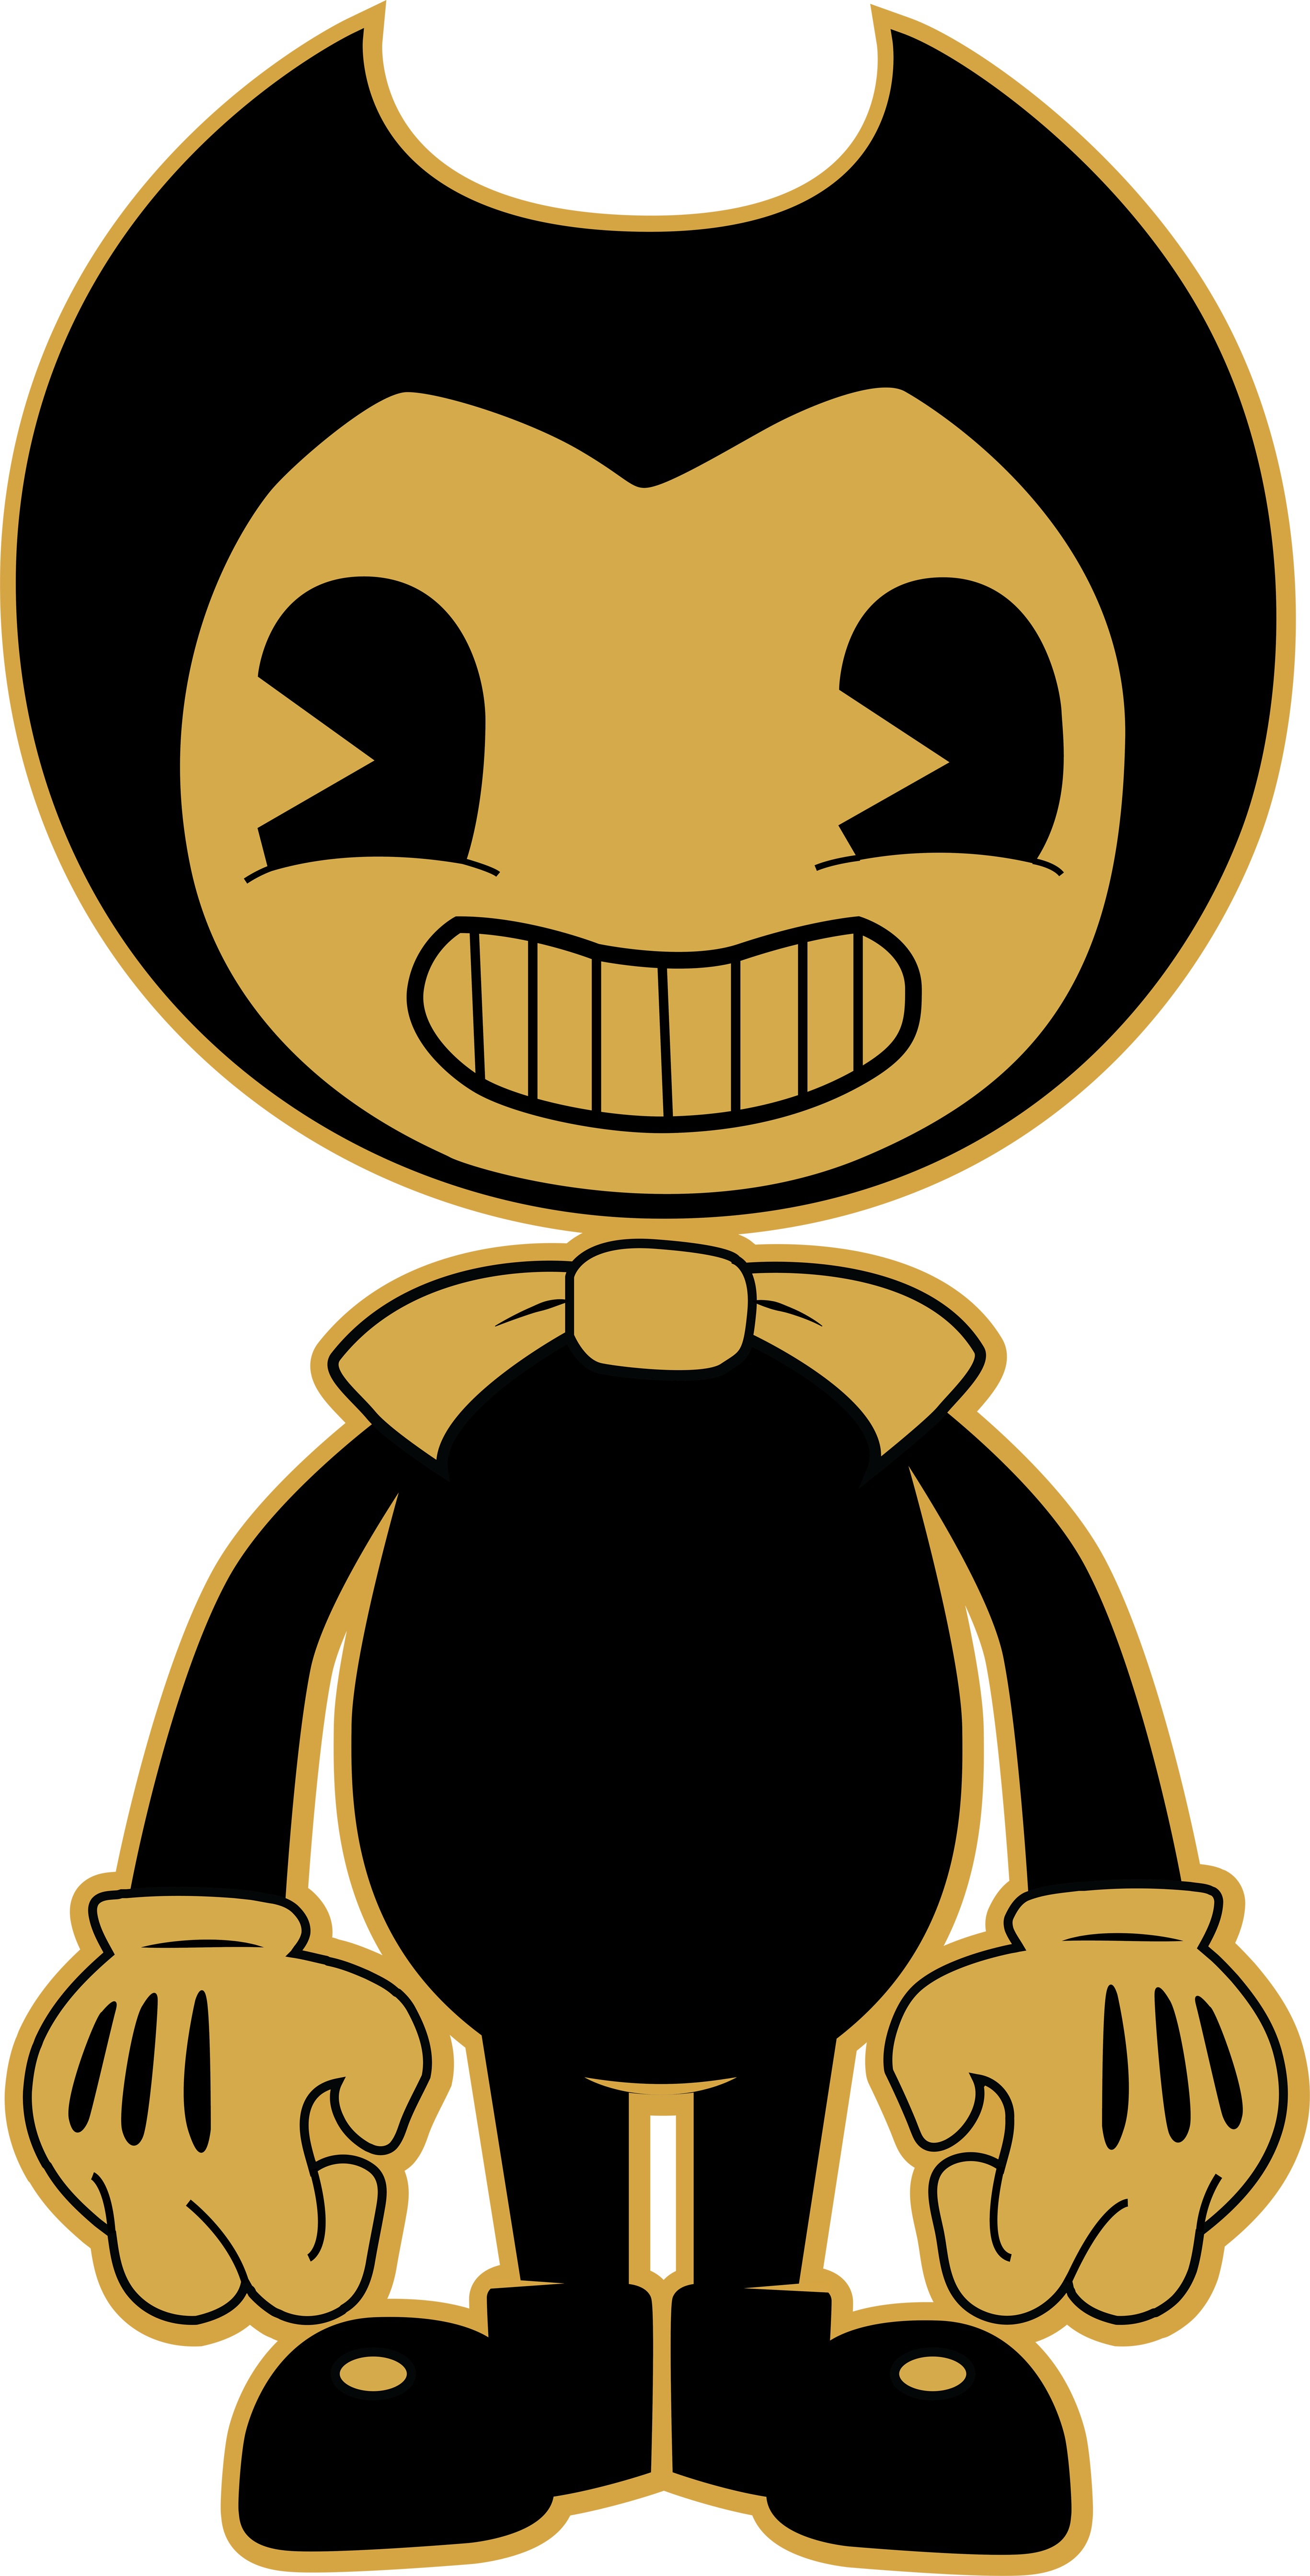 Download Free Roblox Character Youtube Yellow Bendy Machine Icon - roblox character png images free transparent image download